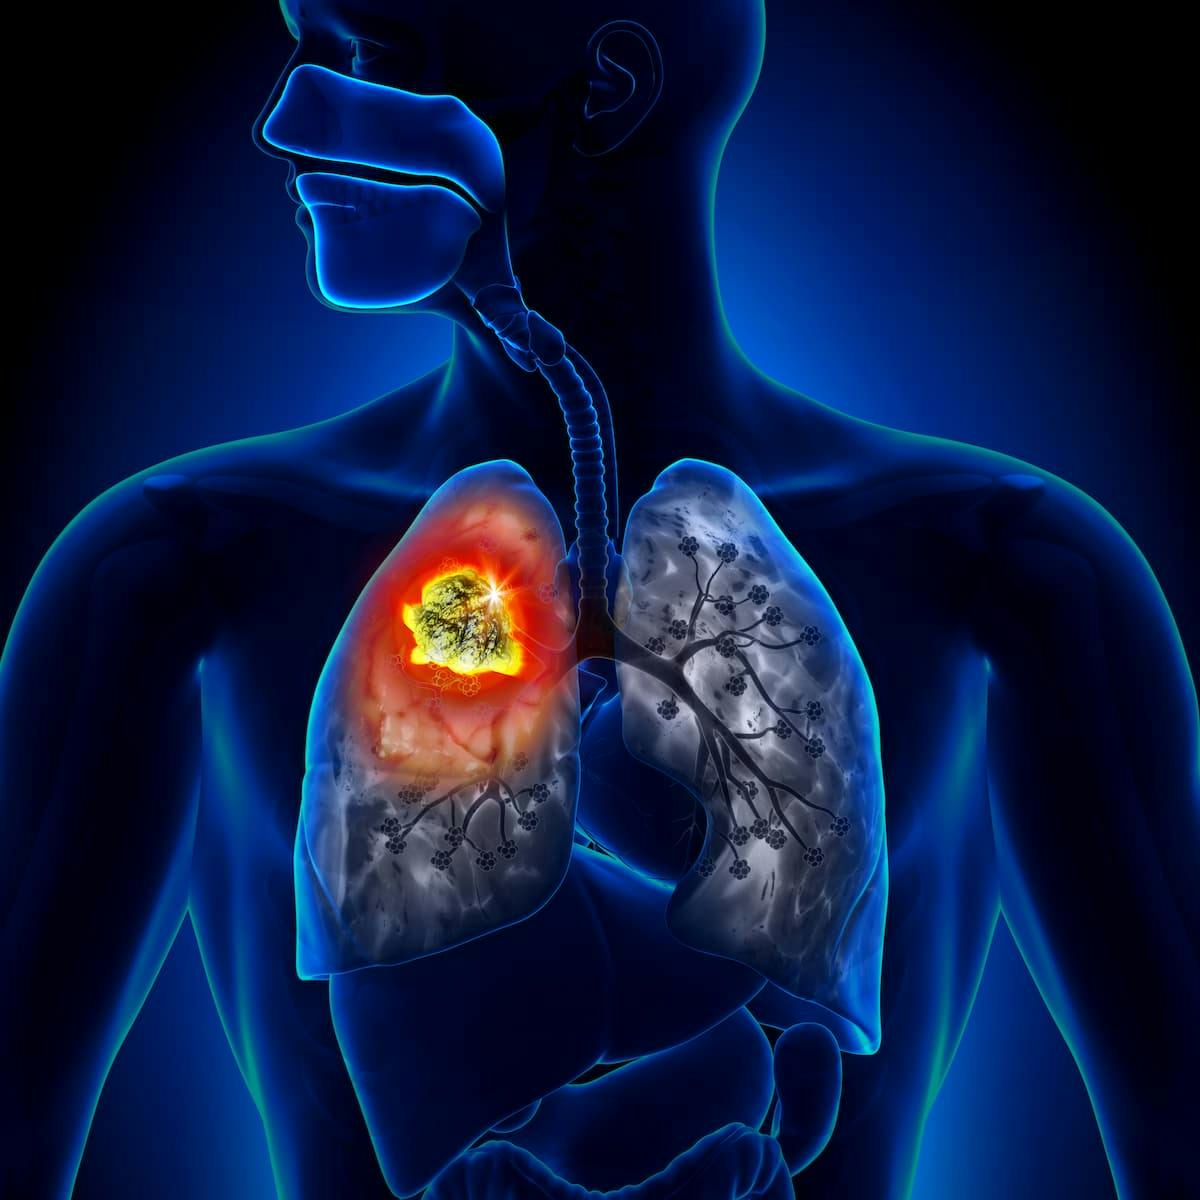 Data from the phase 3 KEYNOTE-671 trial support the European Commission’s approval of pembrolizumab plus chemotherapy for those with resectable non–small cell lung cancer.